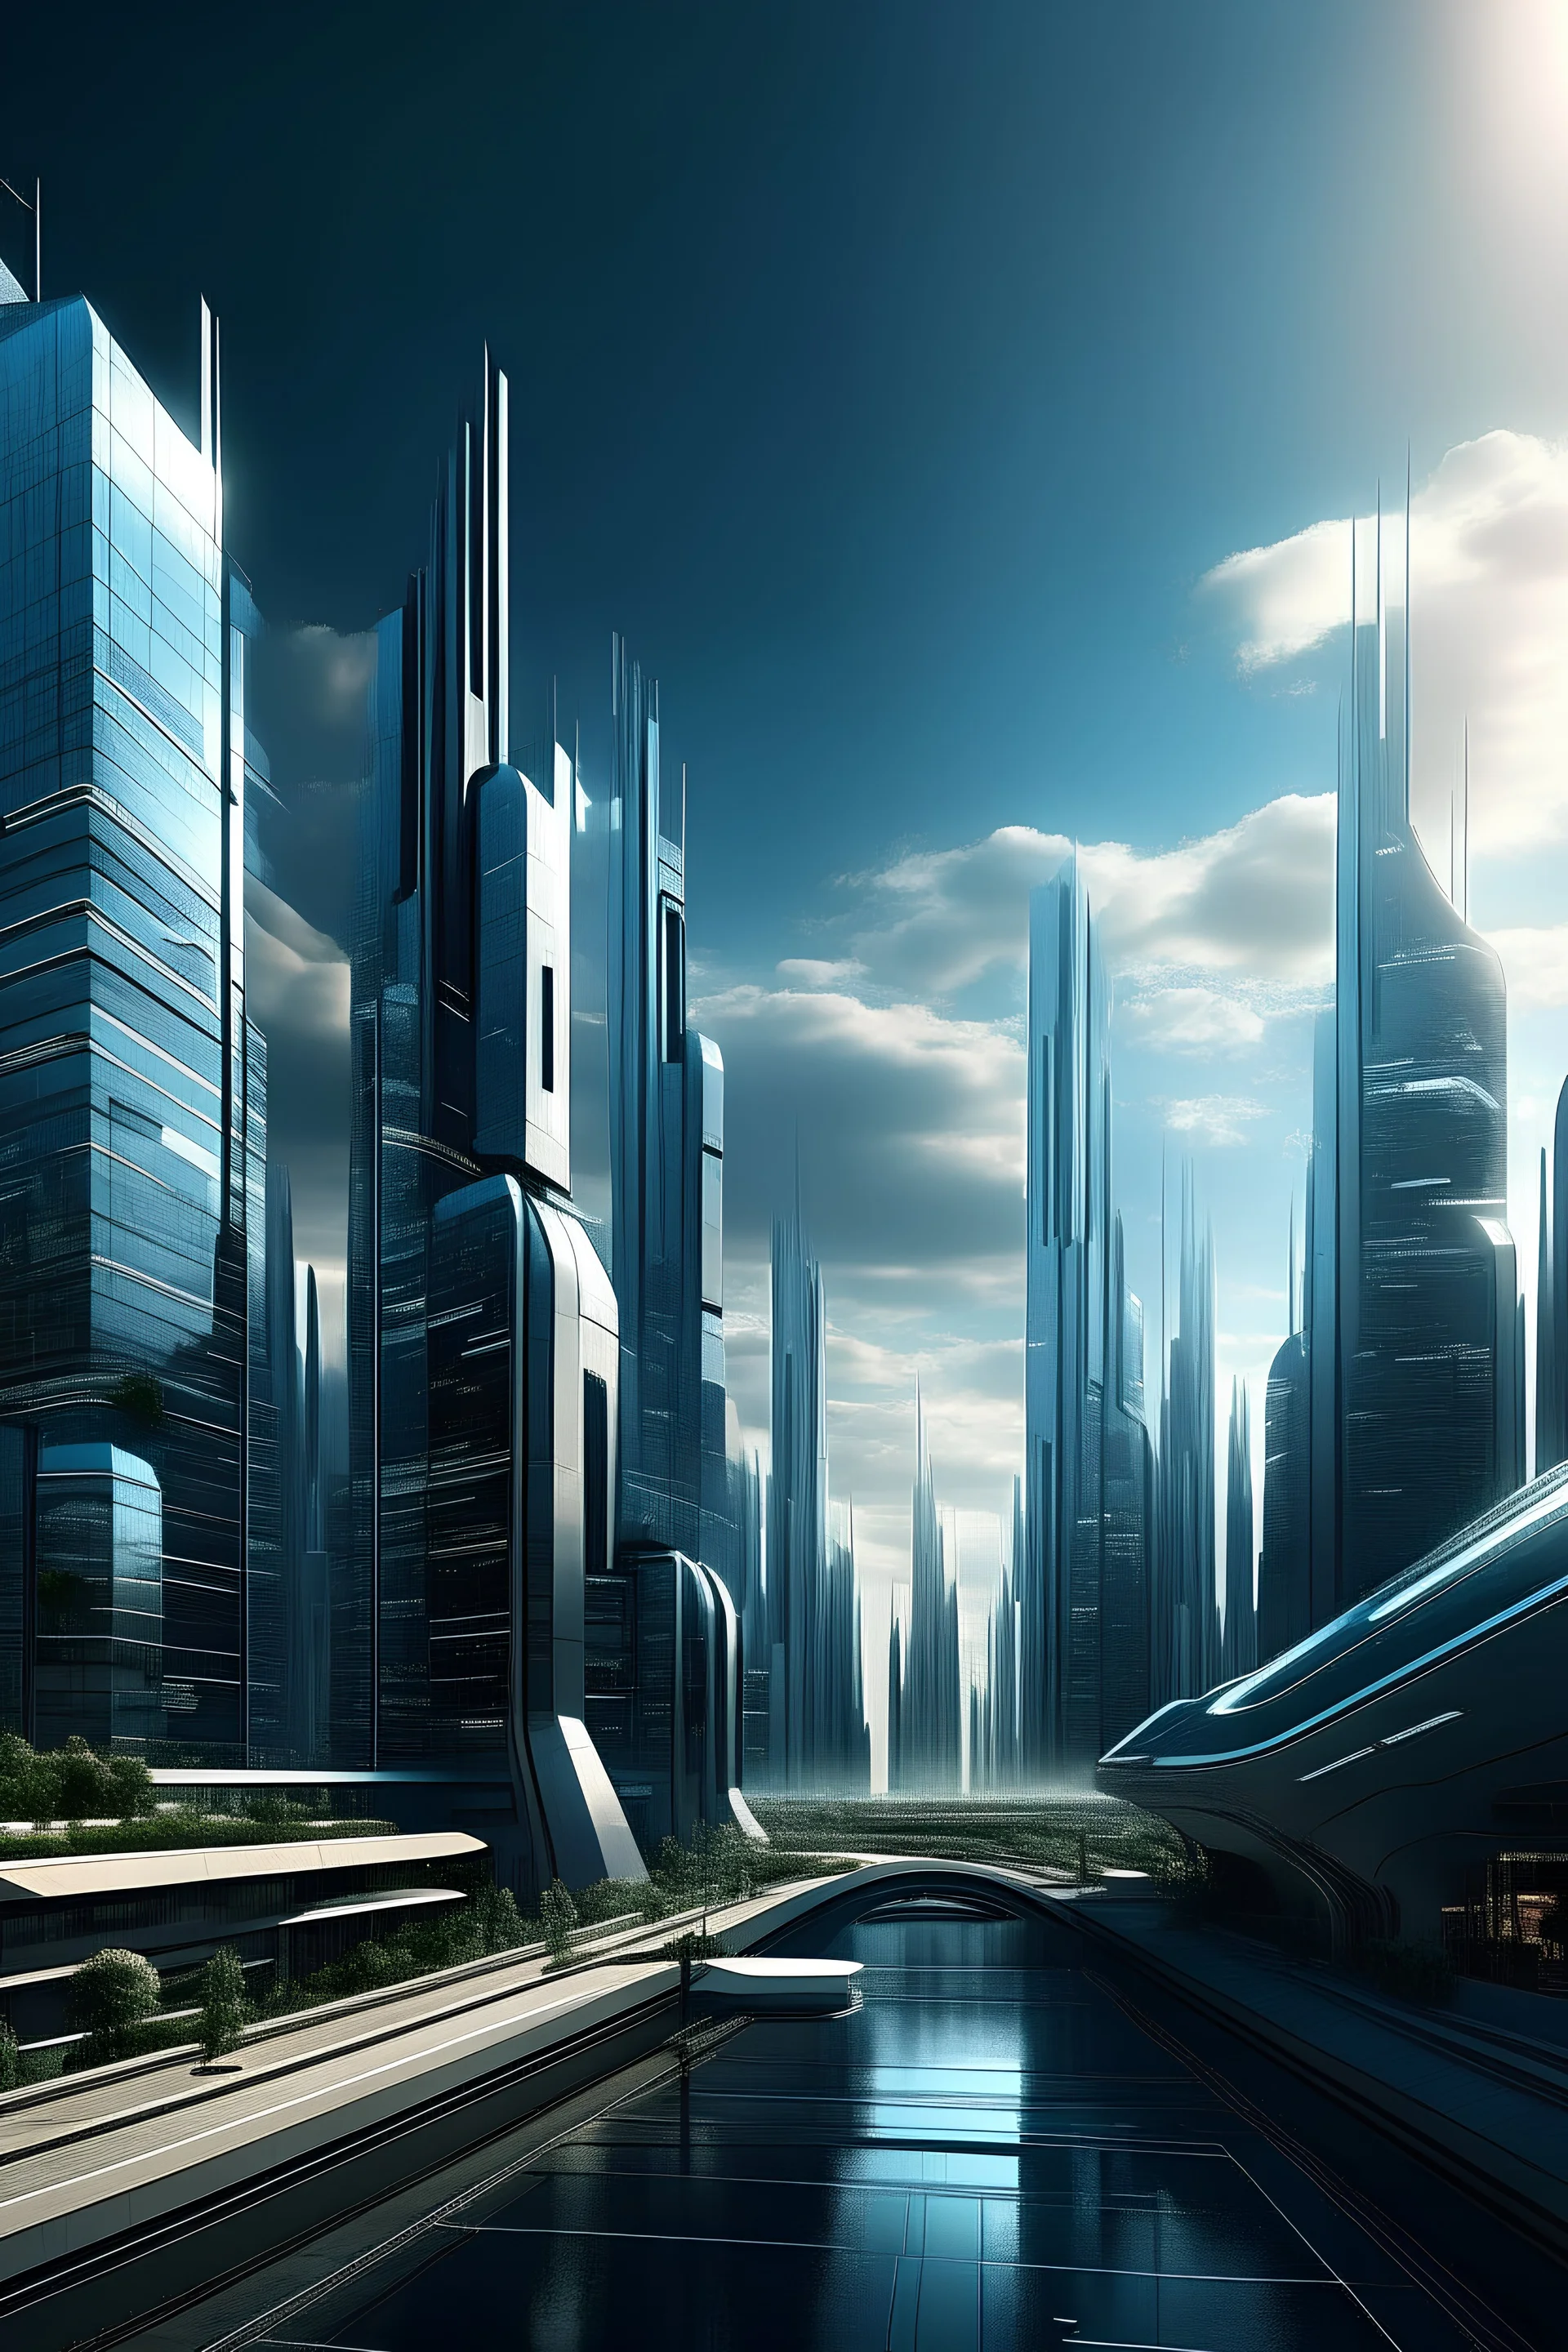 A sleek cityscape with modern skyscrapers, illustrating a vision of the future.